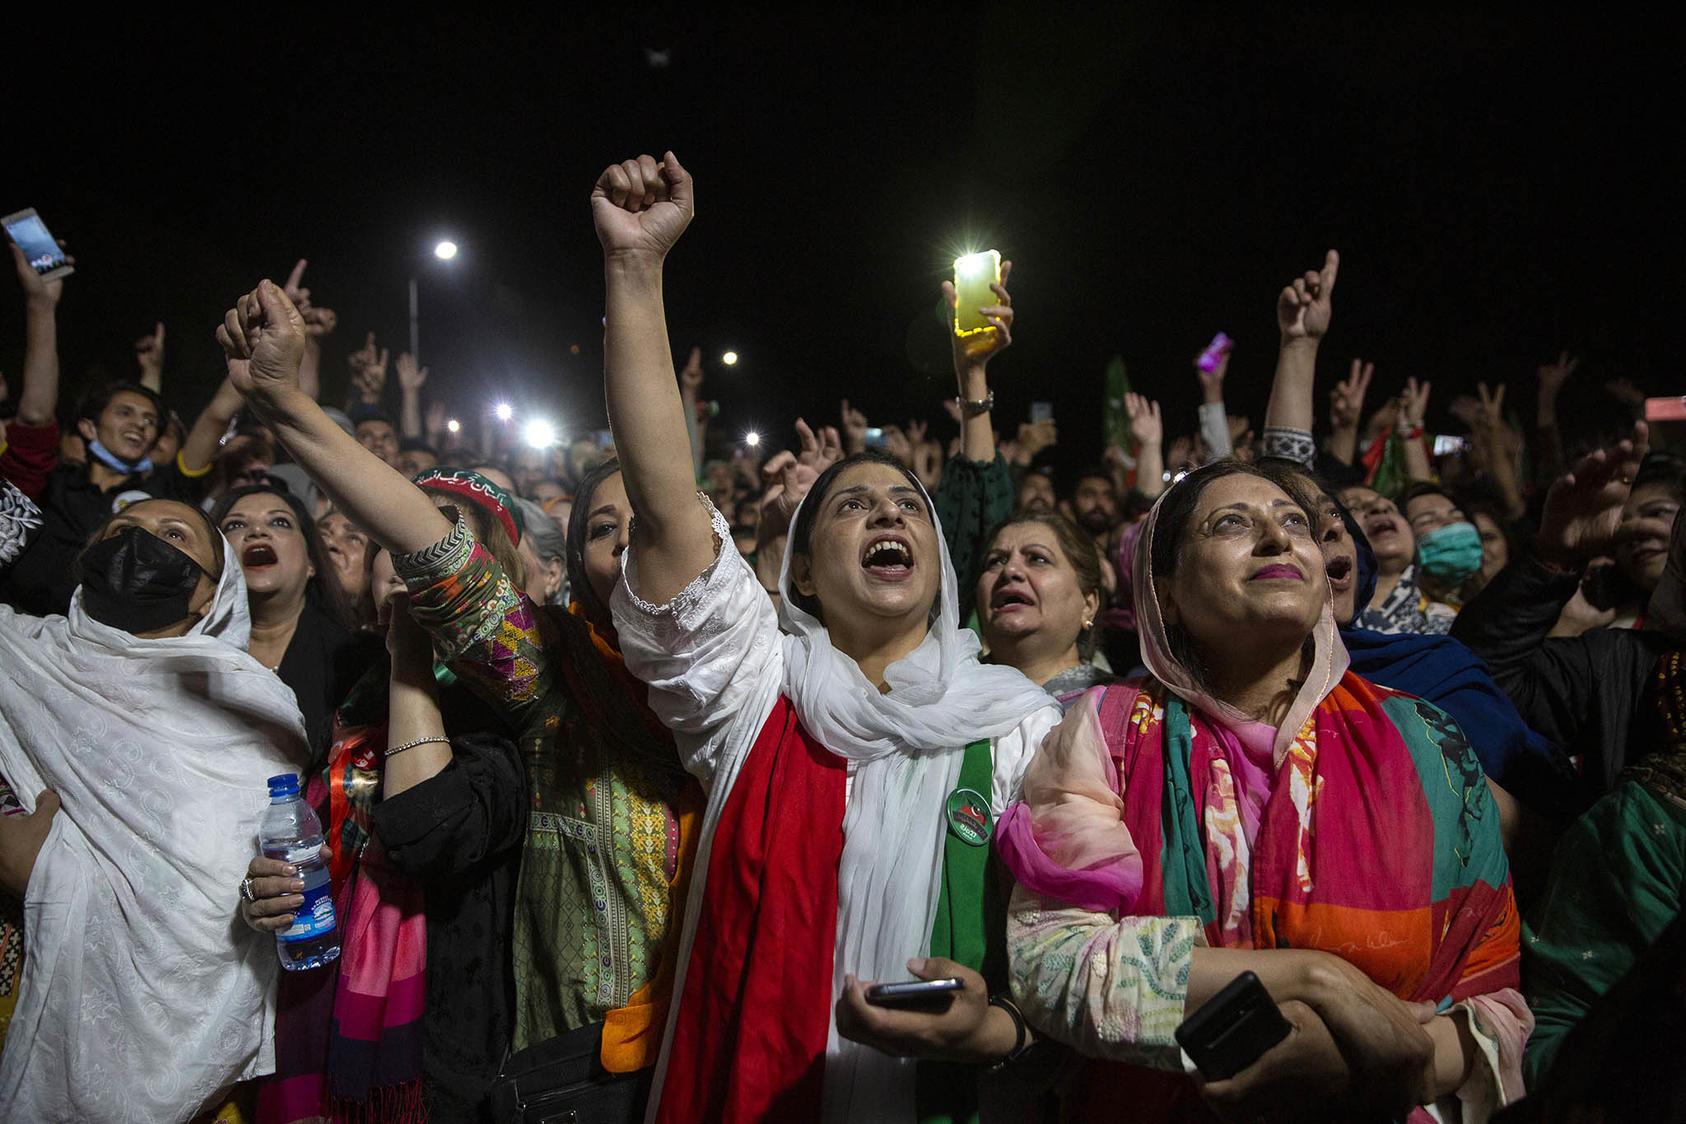 Supporters of Prime Minister Imran Khan rally in Islamabad, Pakistan, on Monday night, April 4, 2022.  (Saiyna Bashir/The New York Times)